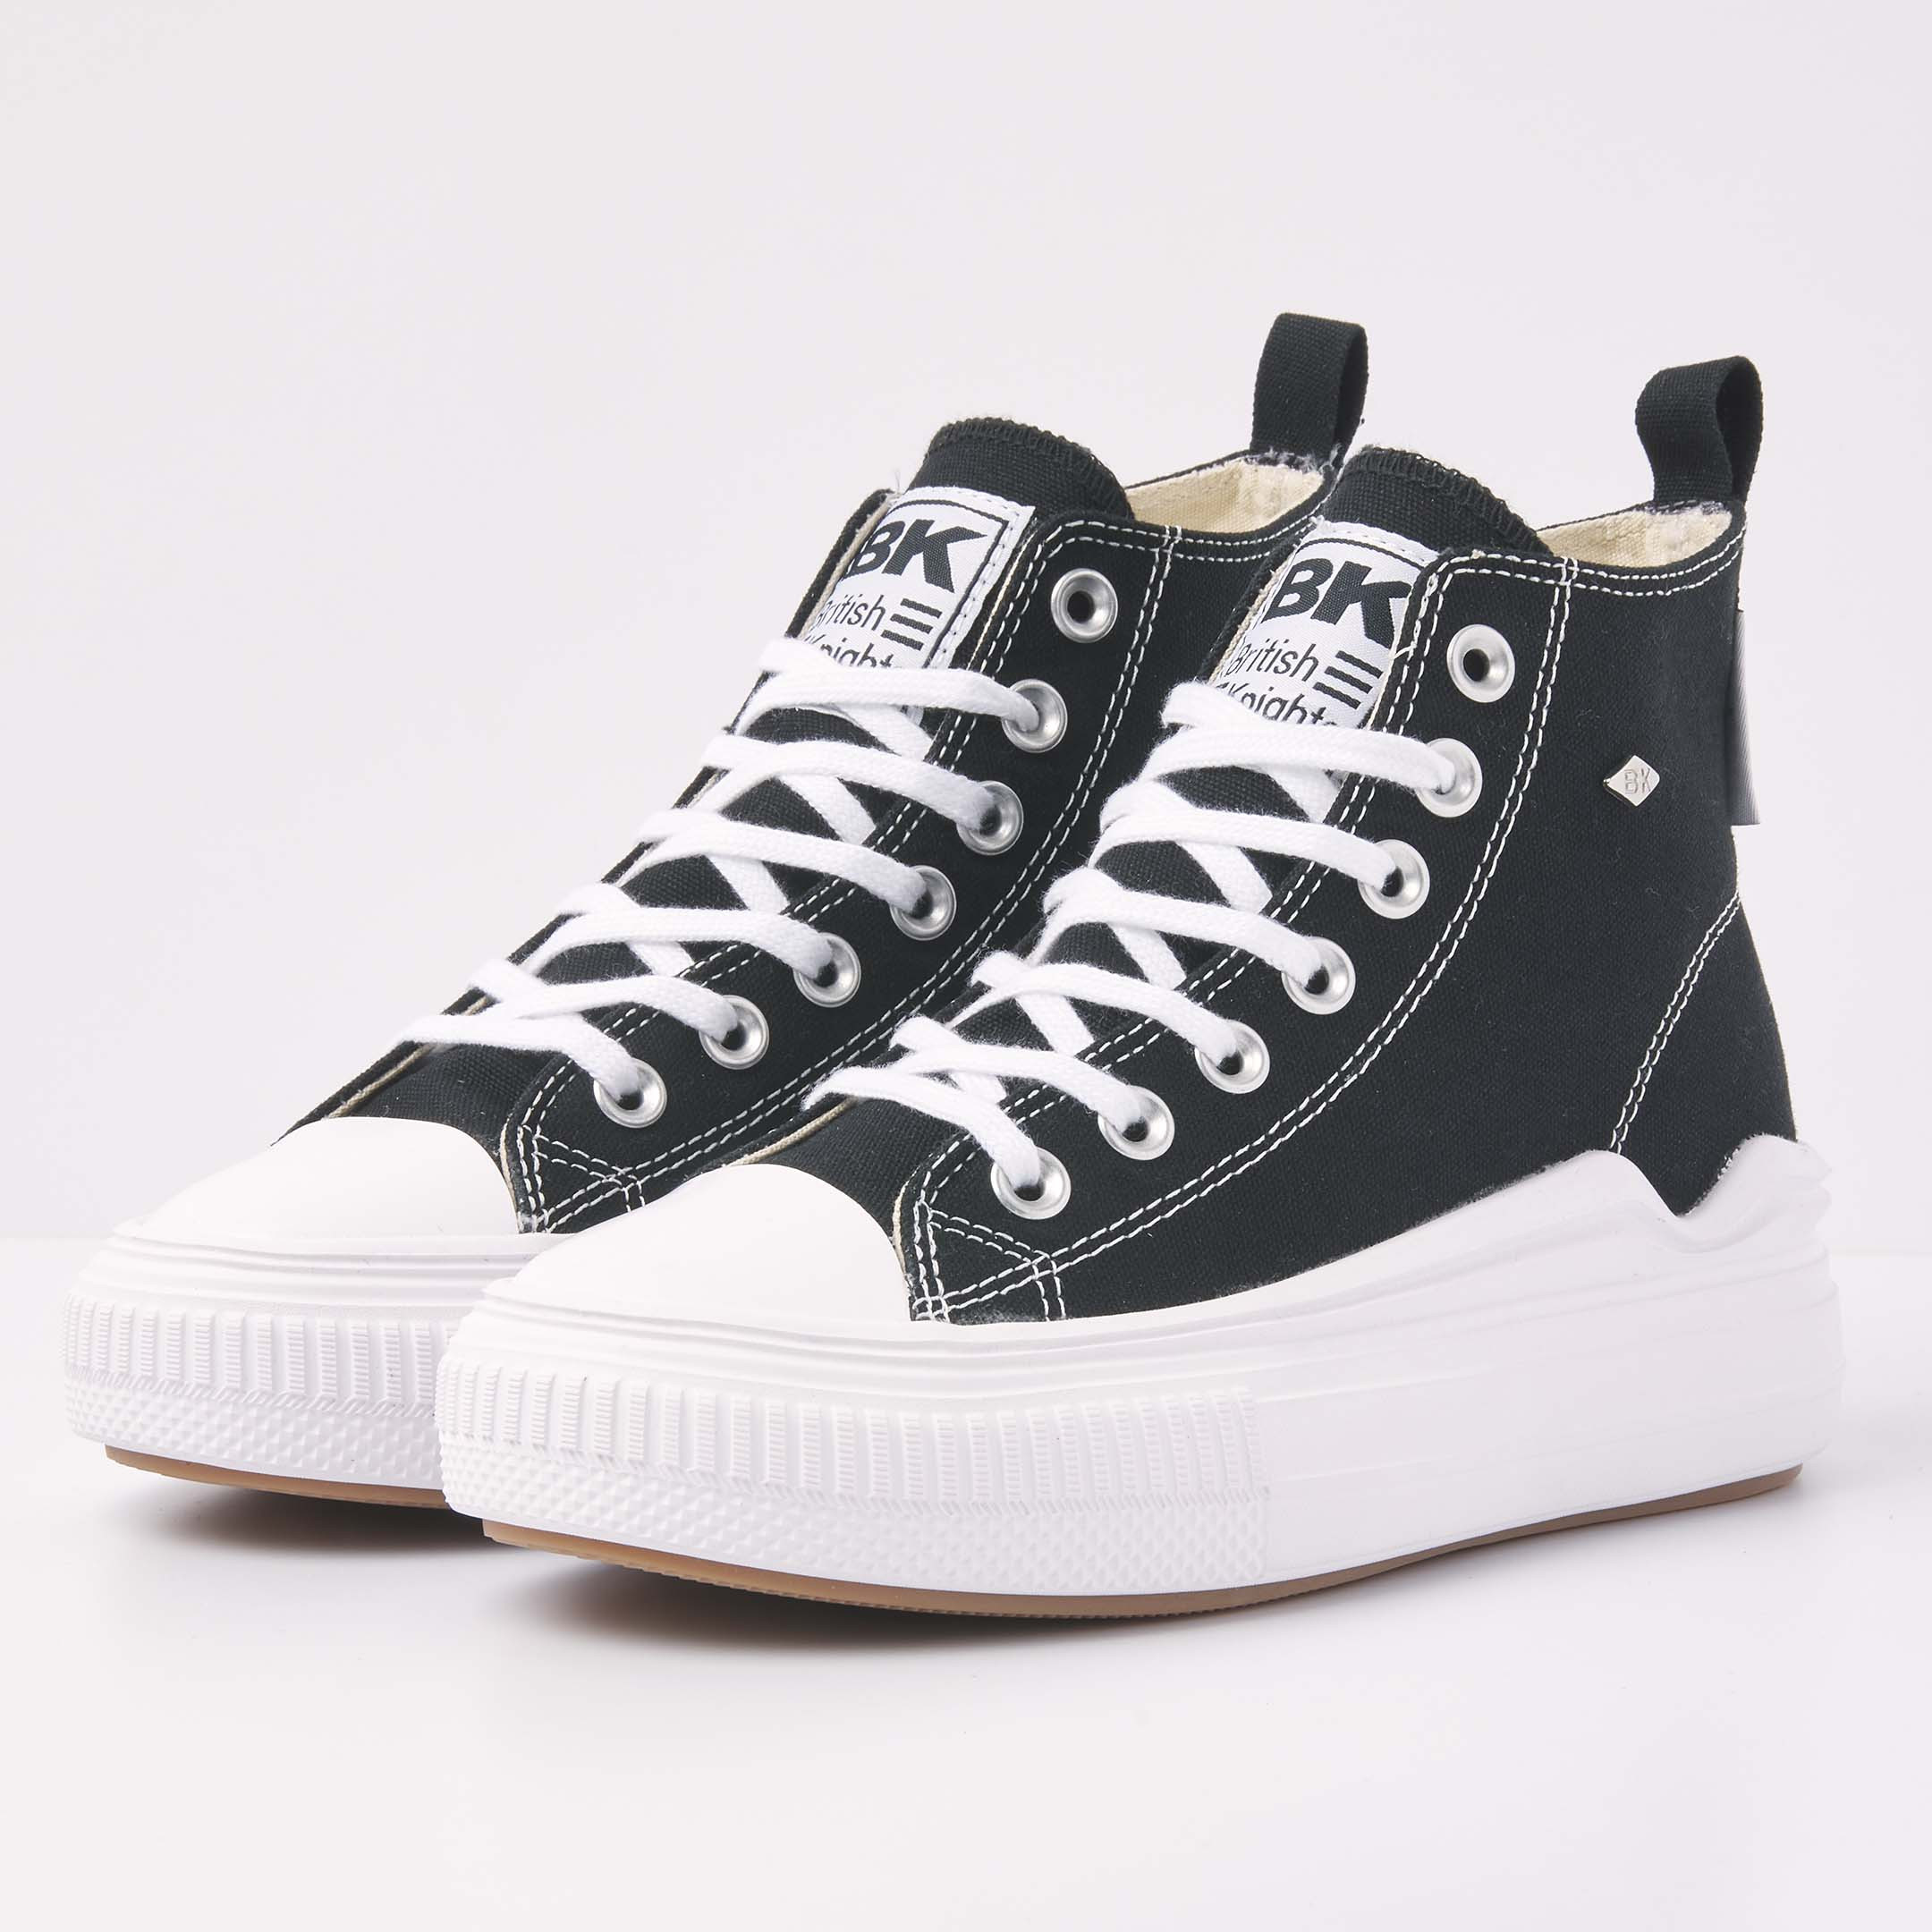 British Knights Sneaker Front view  B51-3734-01 KAYA FLOW MID HIGH-TOP FEMALE